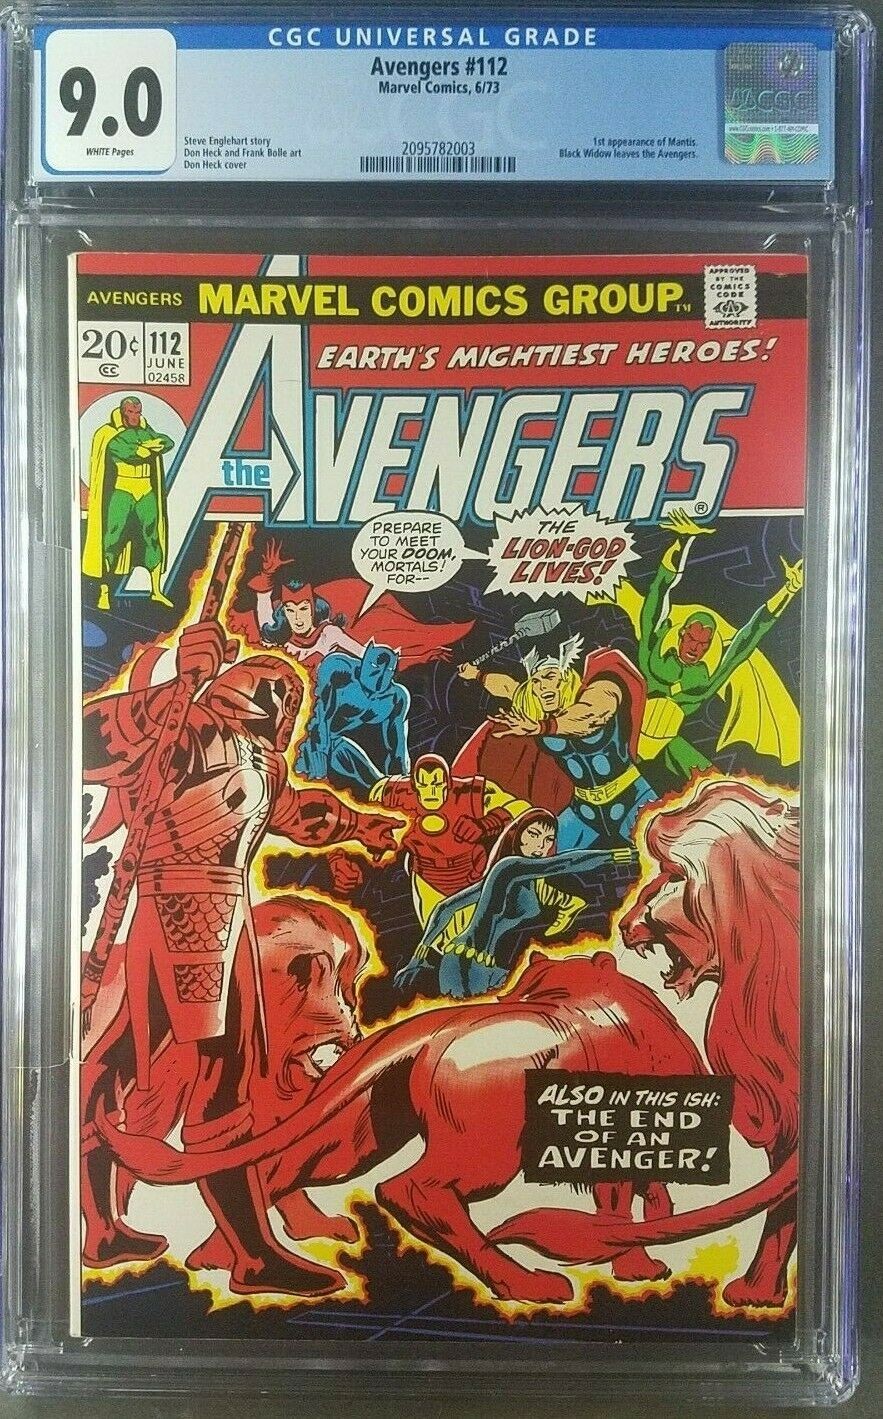 Counting In Covers - Page 3 Avengers-1148fbbc6c0